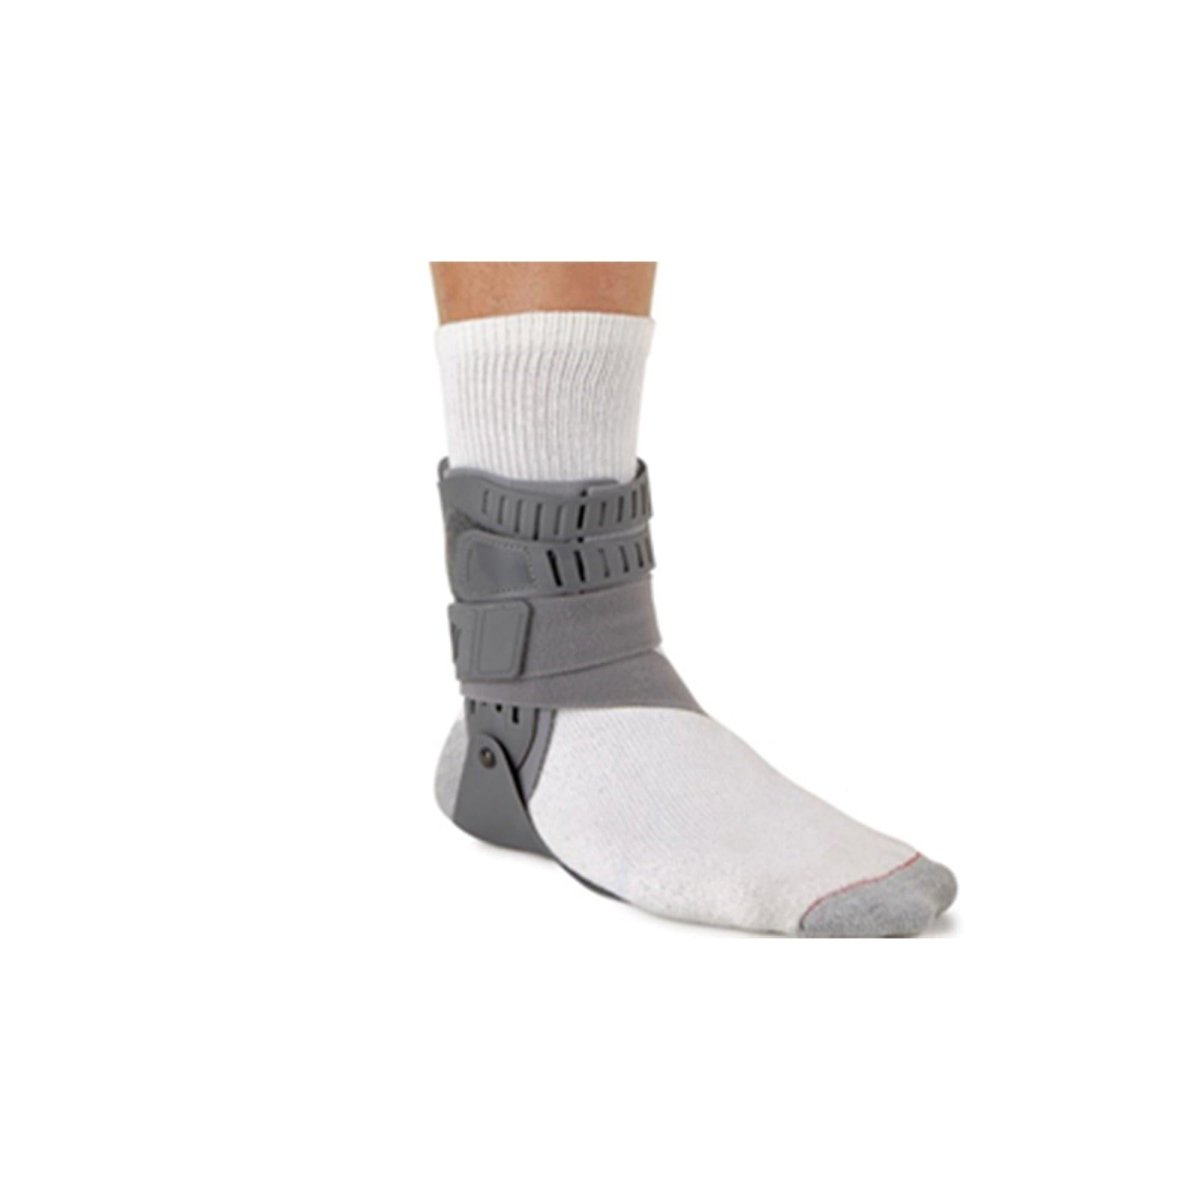 Ossur Rebound Ankle Brace with Stability Strap - B-231SS-B-231602512SS-S-Left Foot - Brace Direct